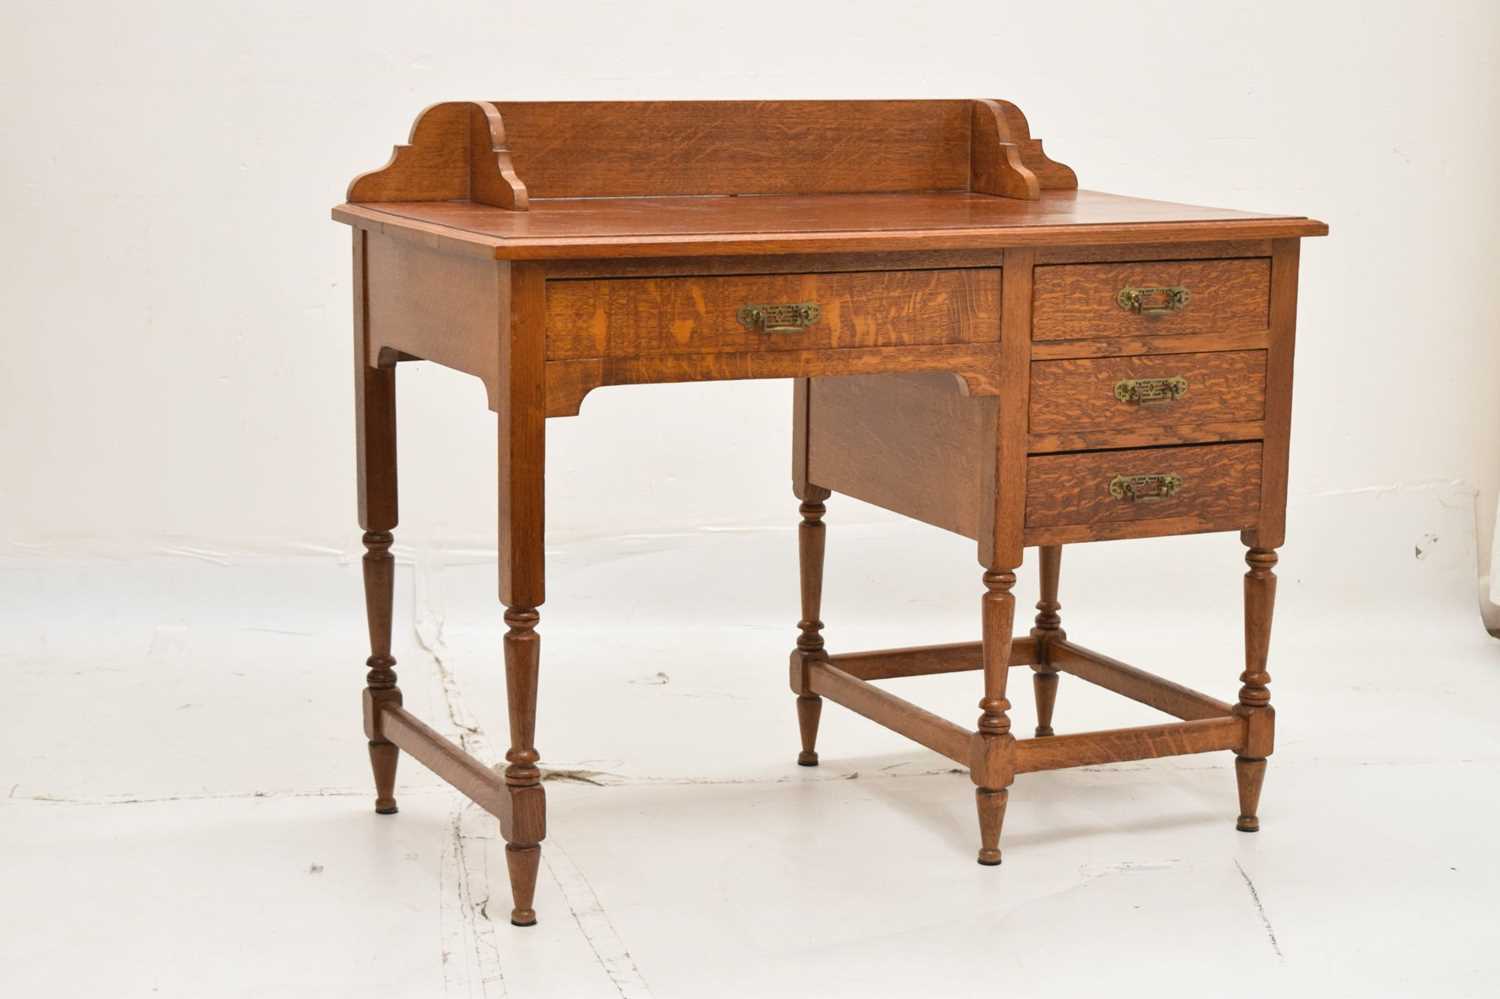 Early 20th century small oak desk - Image 2 of 10